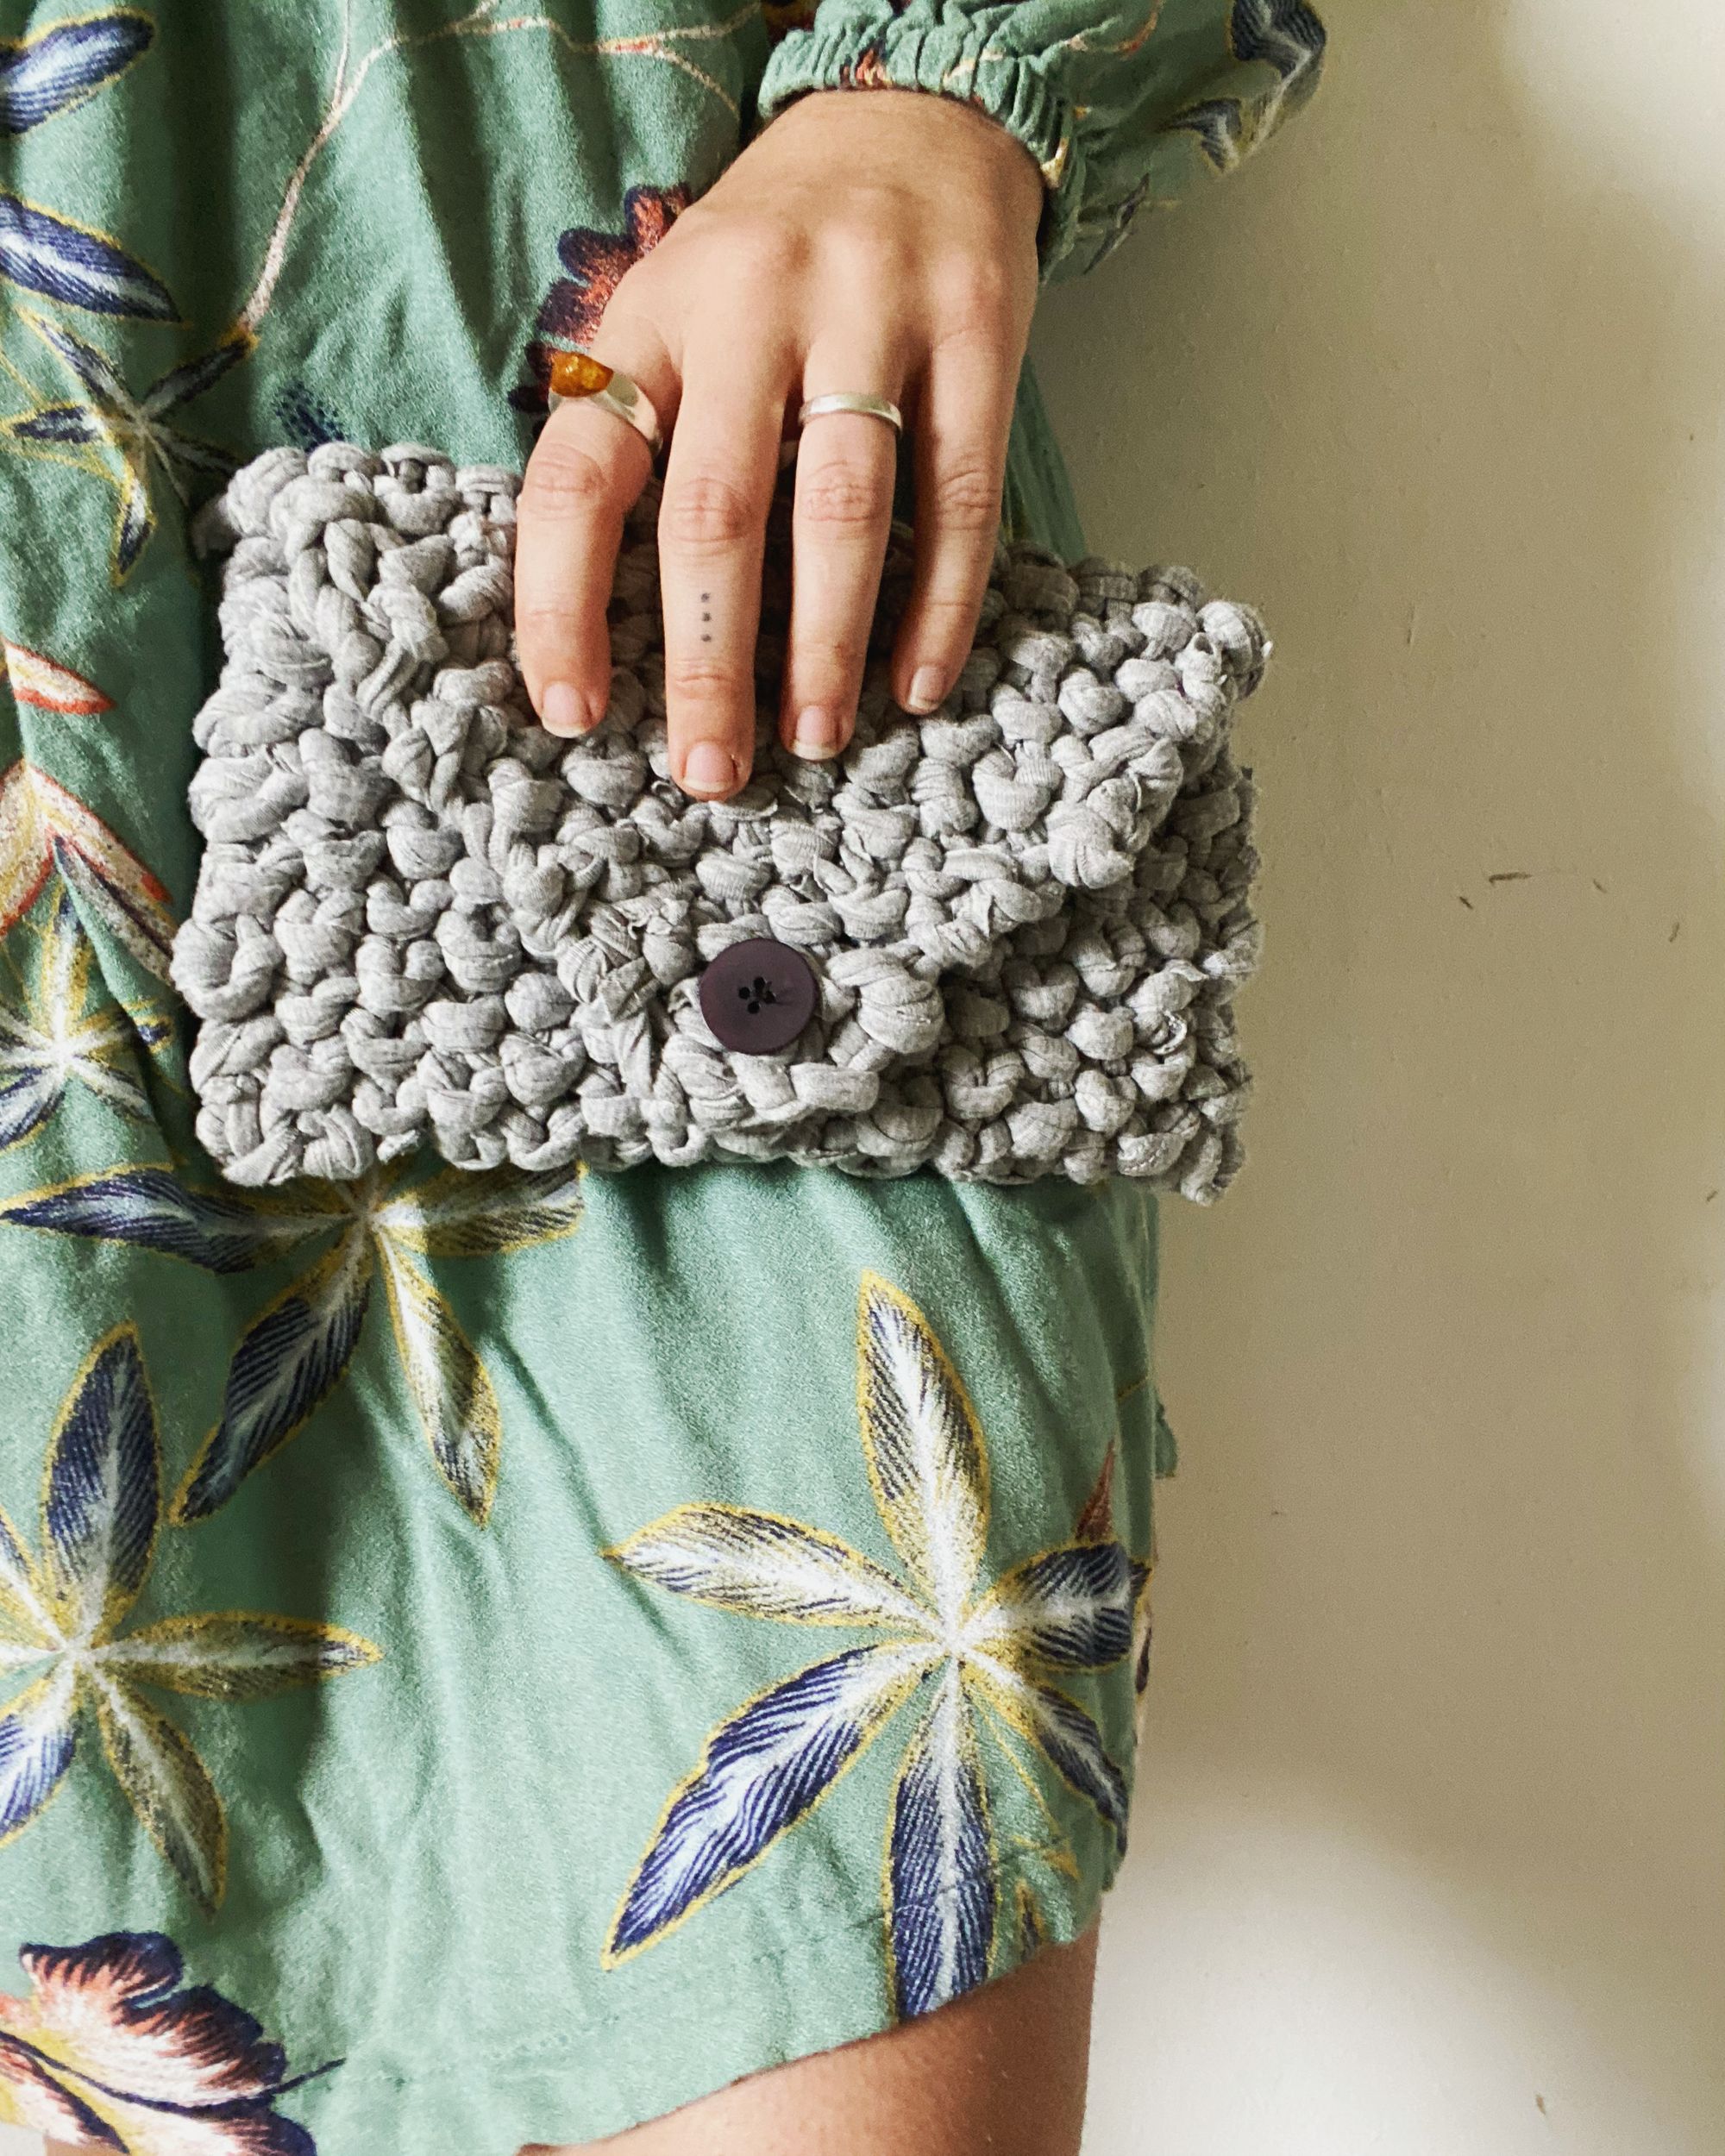 New Video Blog: Knitting a Clutch with Upcycled Material